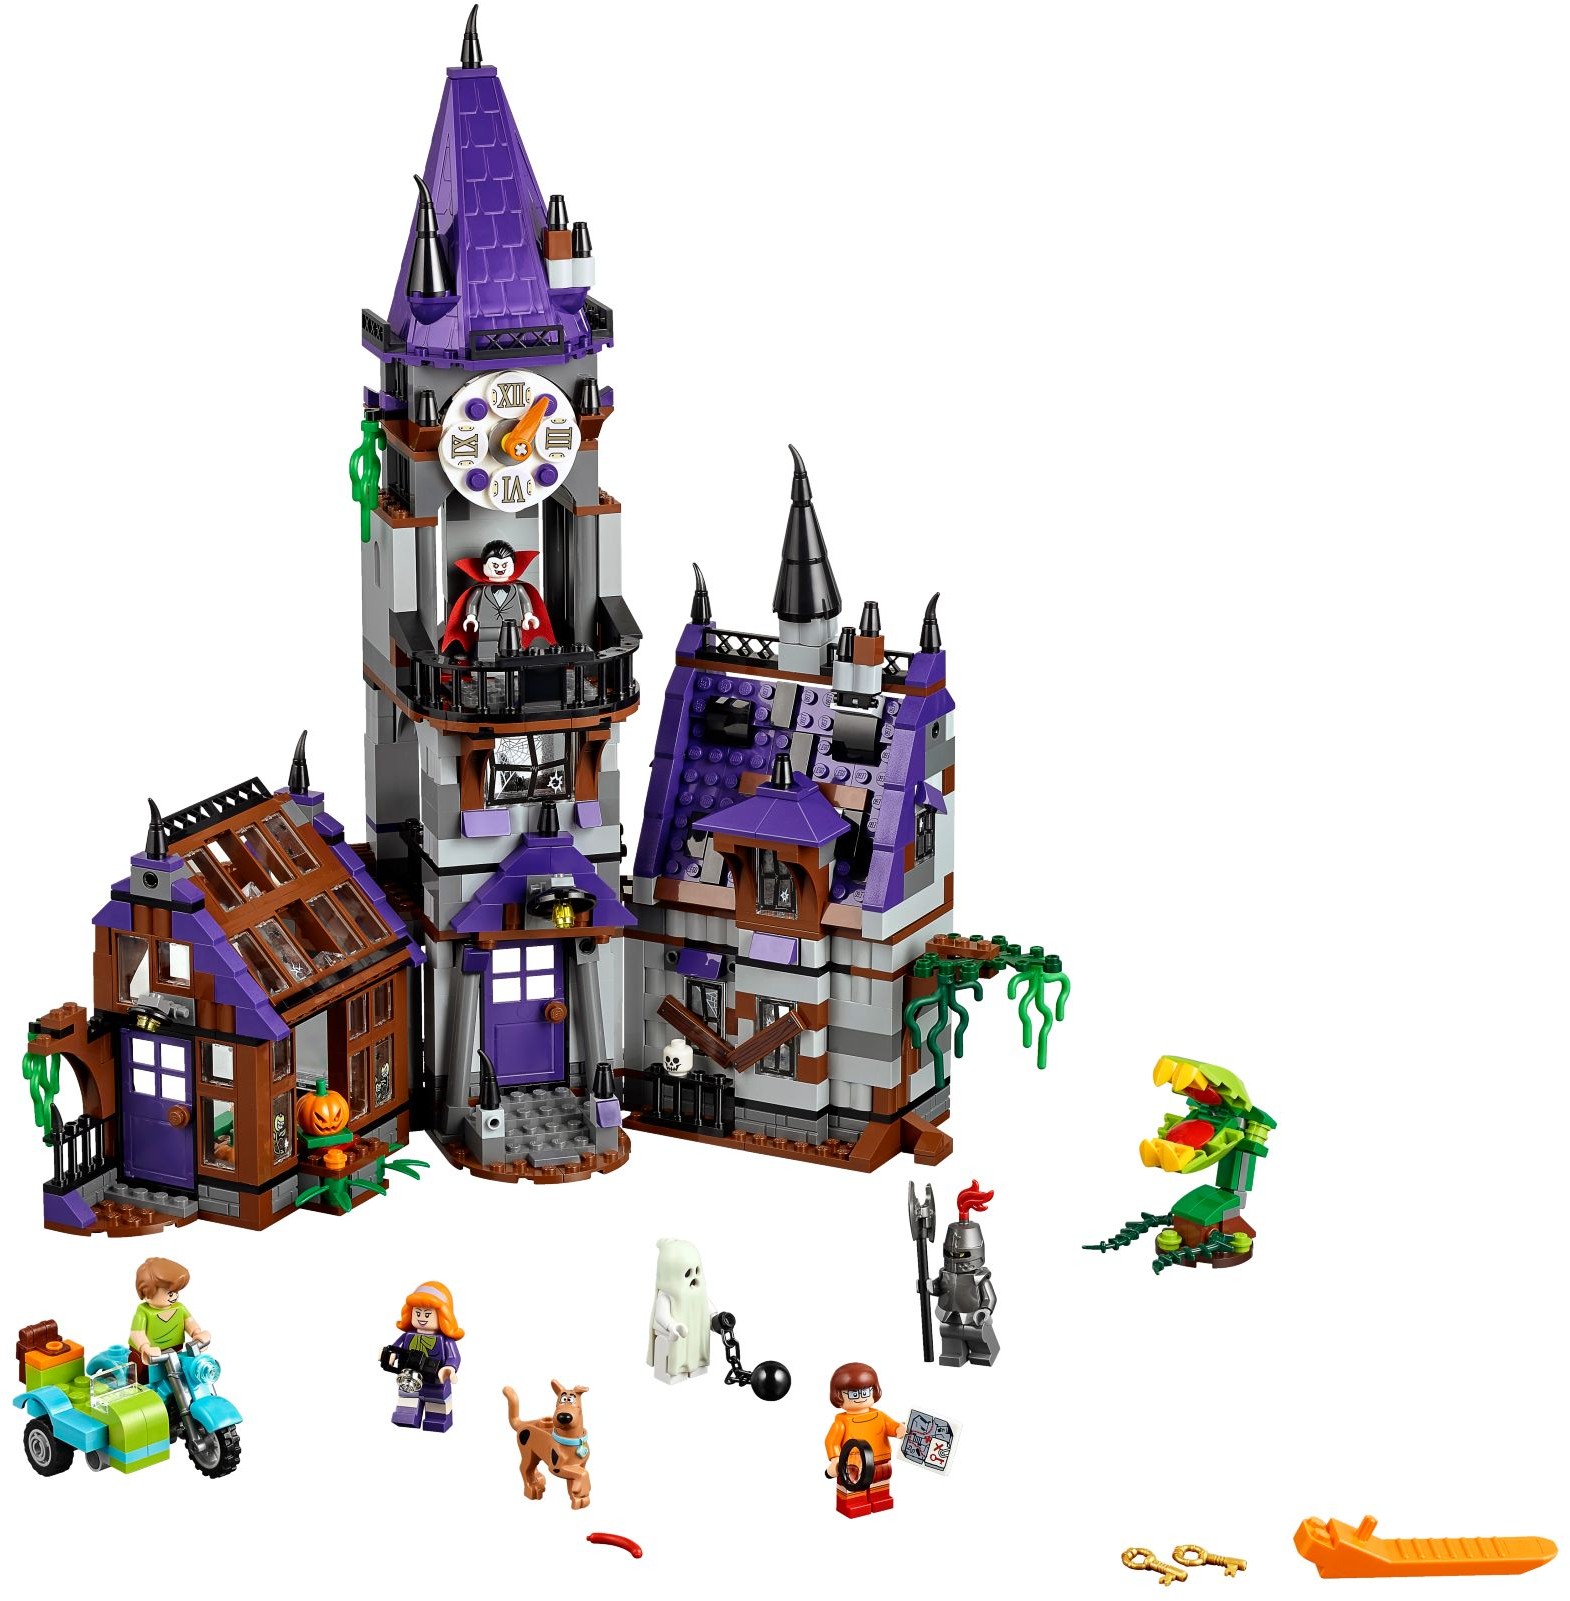 Scooby Doo Mystery Mansion Building Blocks Scoobydoo Kid Toy Gifts Blocks 860pcs 